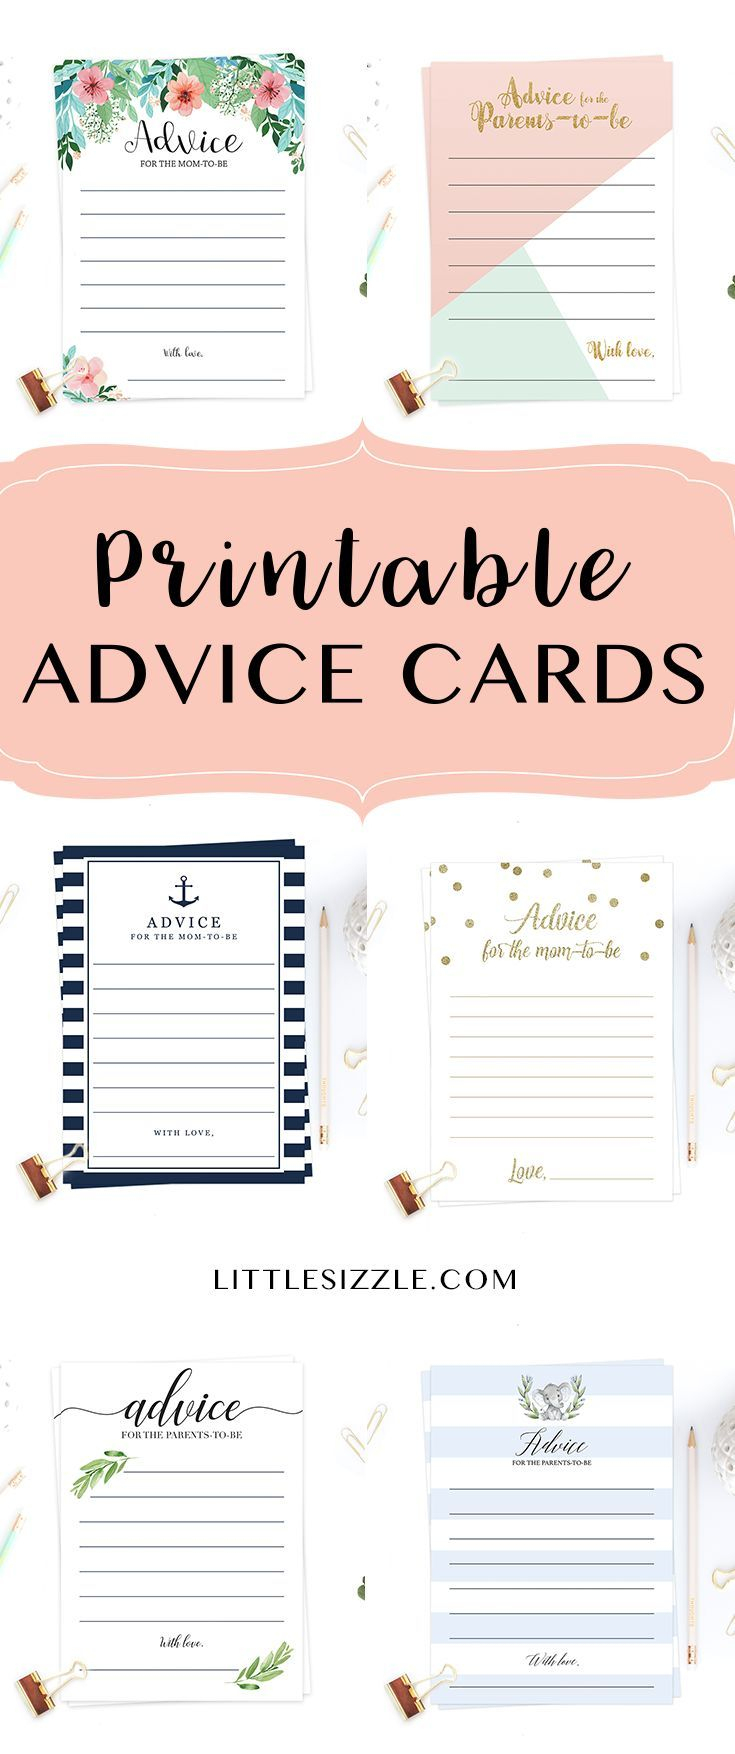 Baby Shower Advice Cards For Mom To Belittlesizzle. Printable - Free Printable Advice Cards For Parents To Be